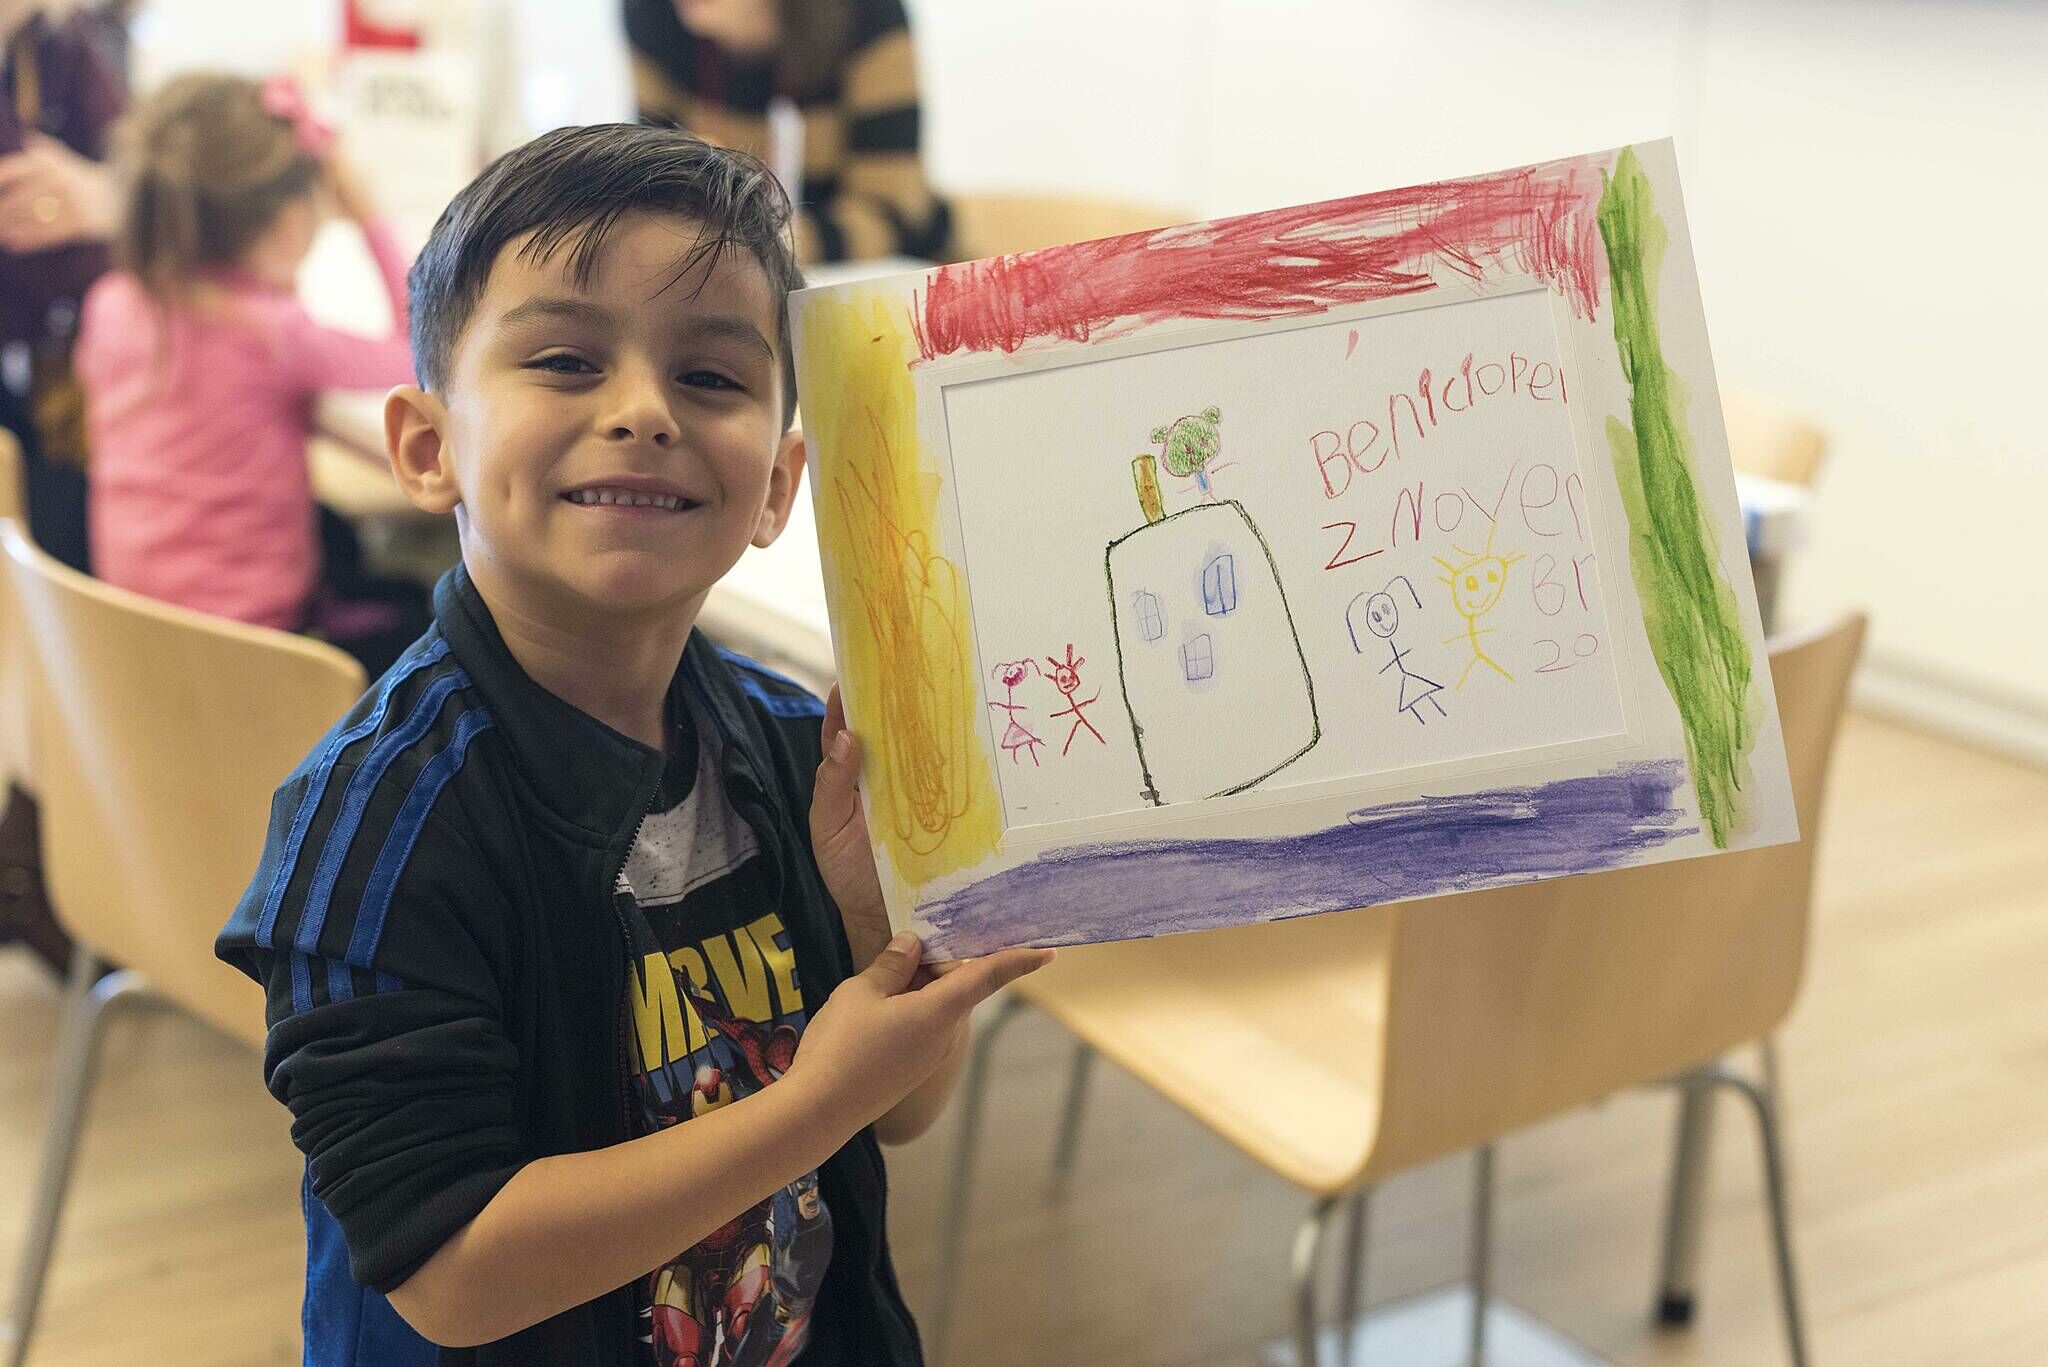 A kid showing off his artwork.